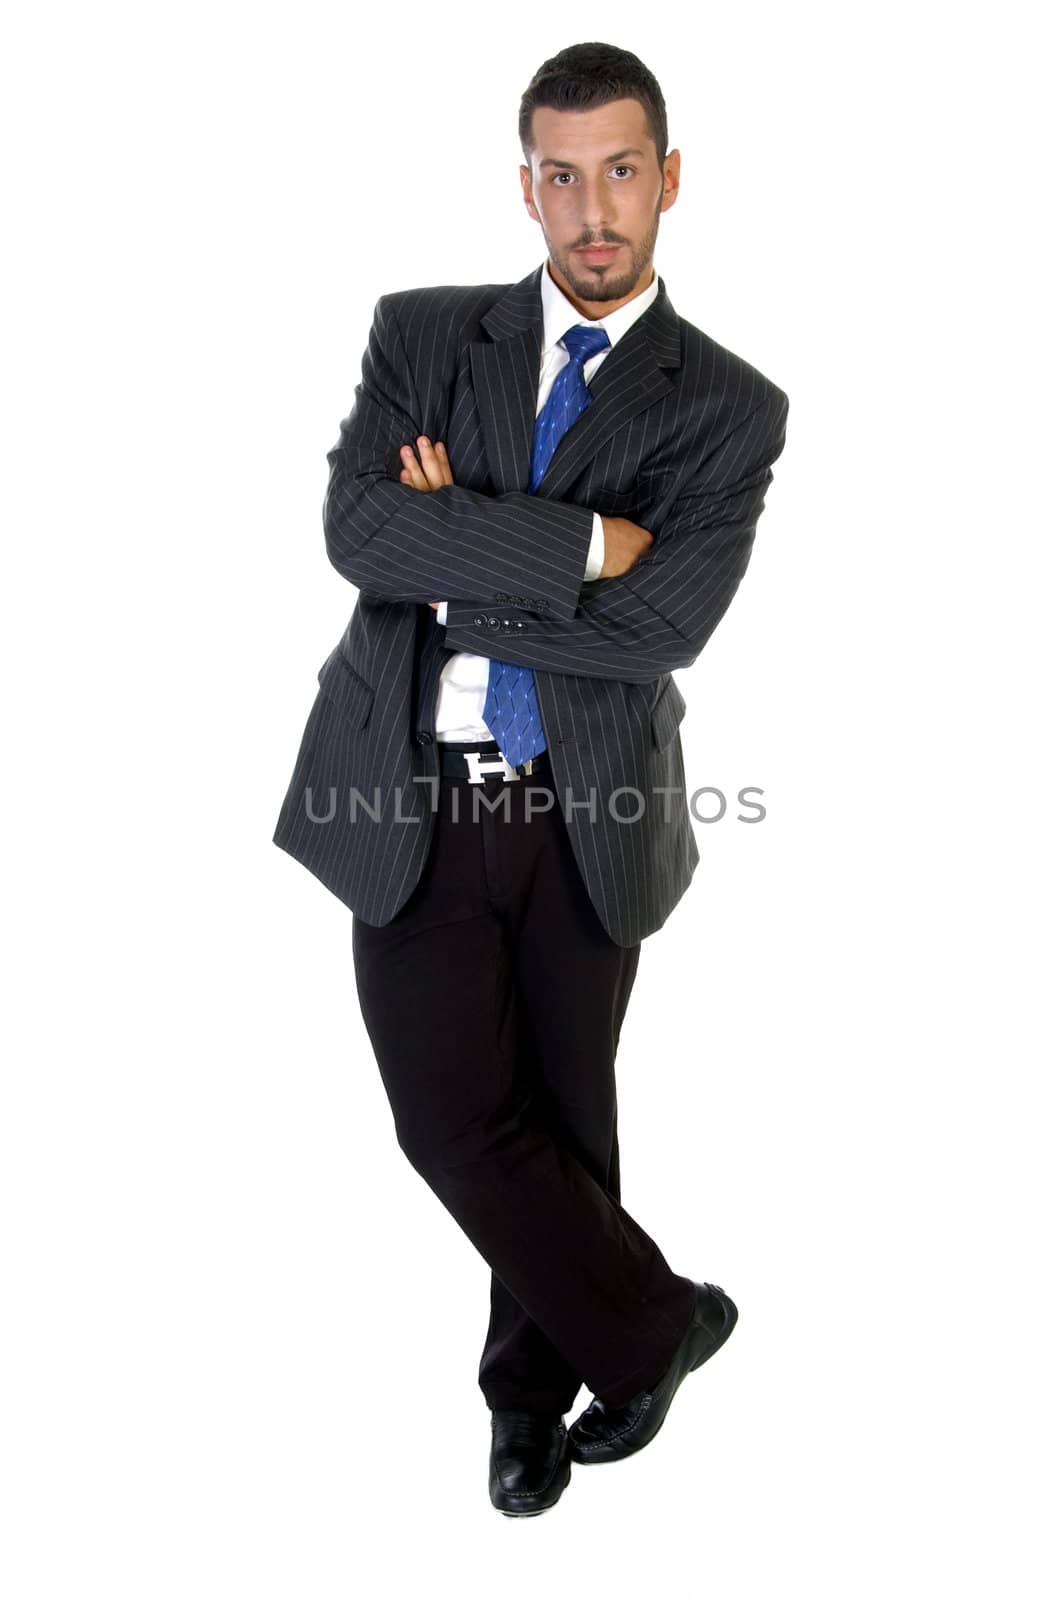 stylish pose of successful businessperson by imagerymajestic